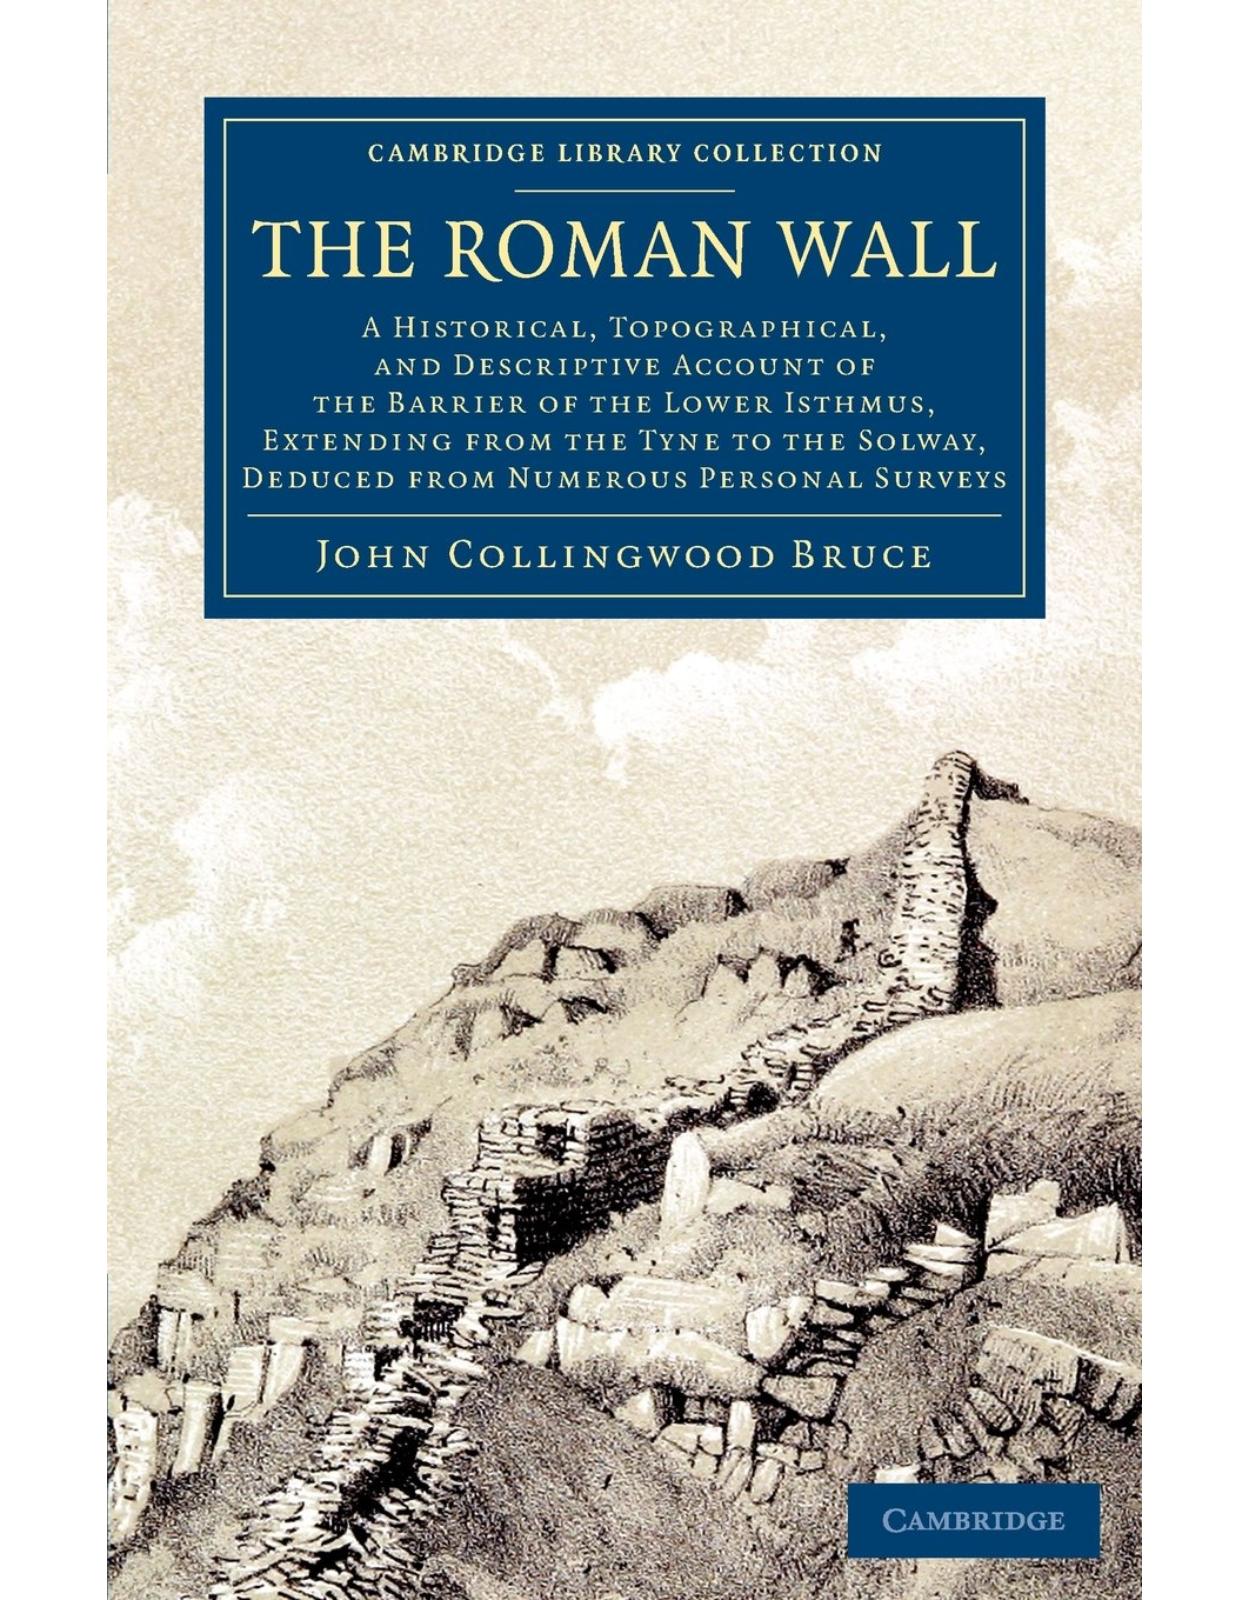 The Roman Wall: A Historical, Topographical, and Descriptive Account of the Barrier of the Lower Isthmus, Extending from the Tyne to the Solway, ... (Cambridge Library Collection - Archaeology)